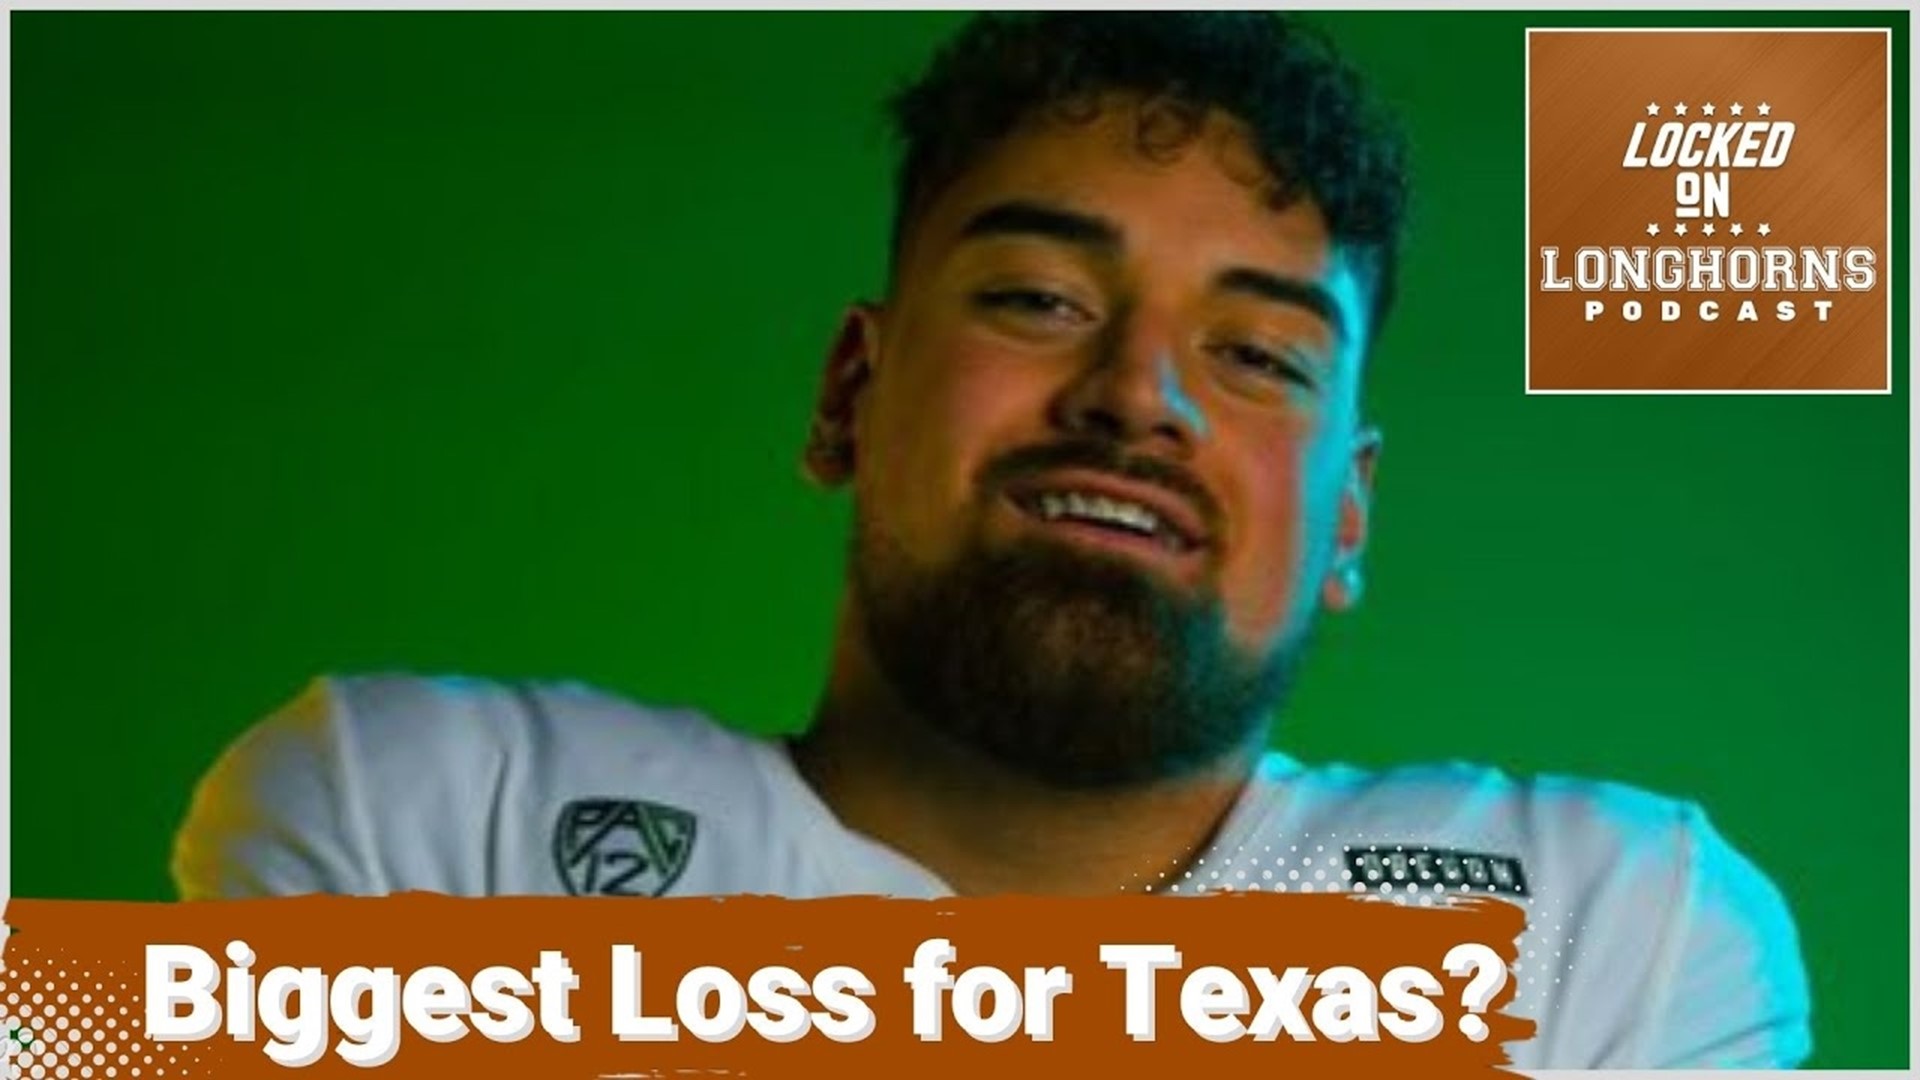 The Texas Longhorns have one of the most explosive rosters in college football heading into the 2023 season, but they also lost some really talented players